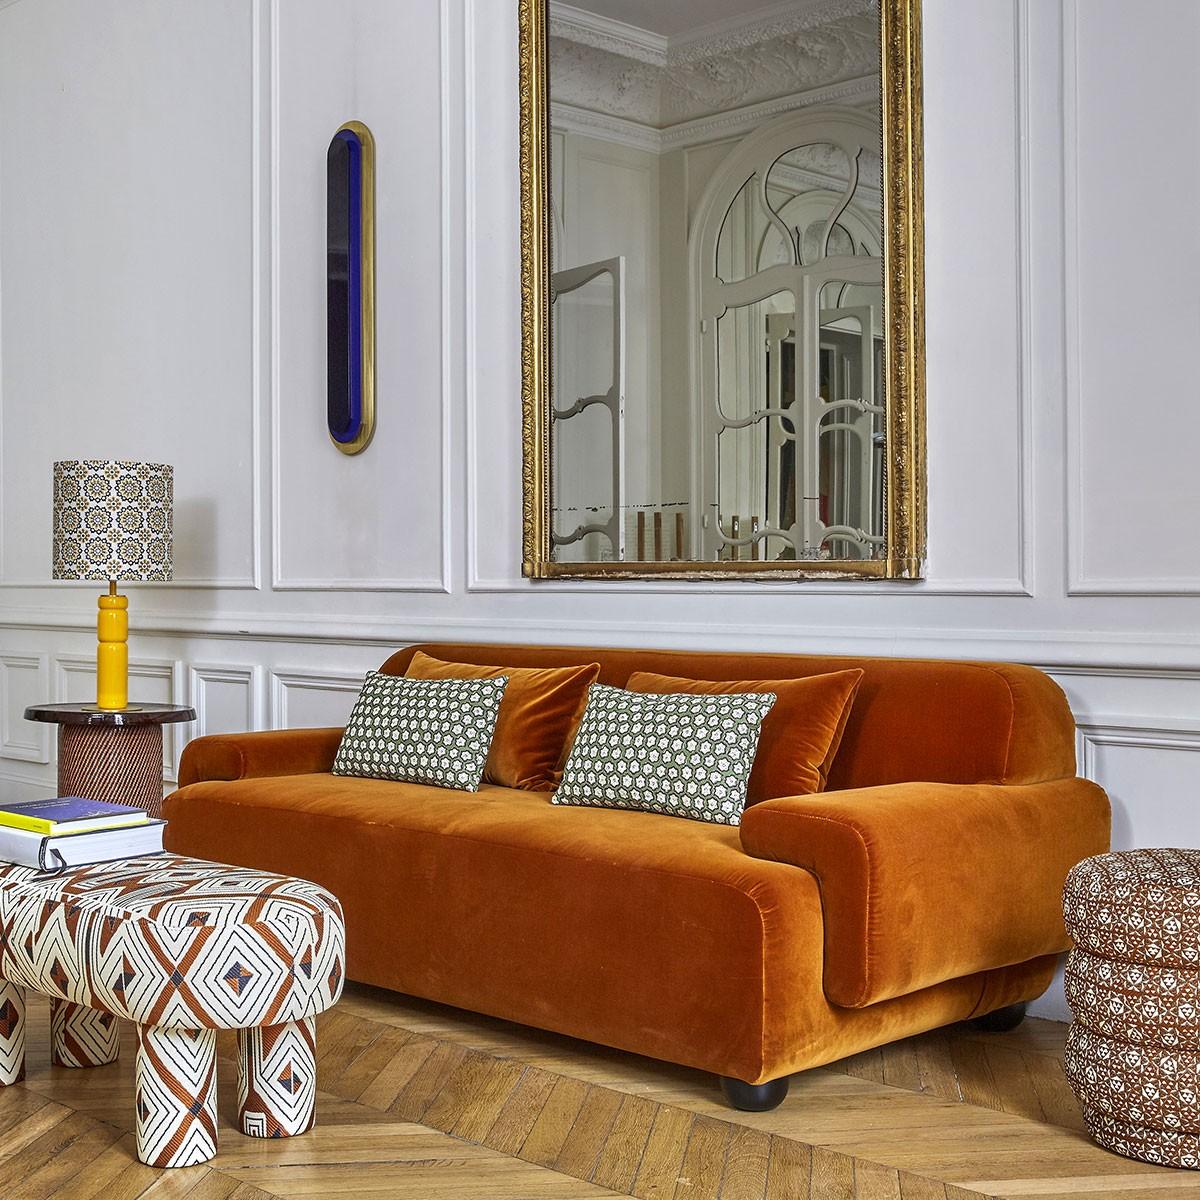 Popus Editions Lena 3 seater sofa in eggplant megeve fabric with knit effect

It looks like it's straight out of a movie, with its generous curves and wide armrests. It is a real invitation to spend long Sundays with the family, comfortably seated